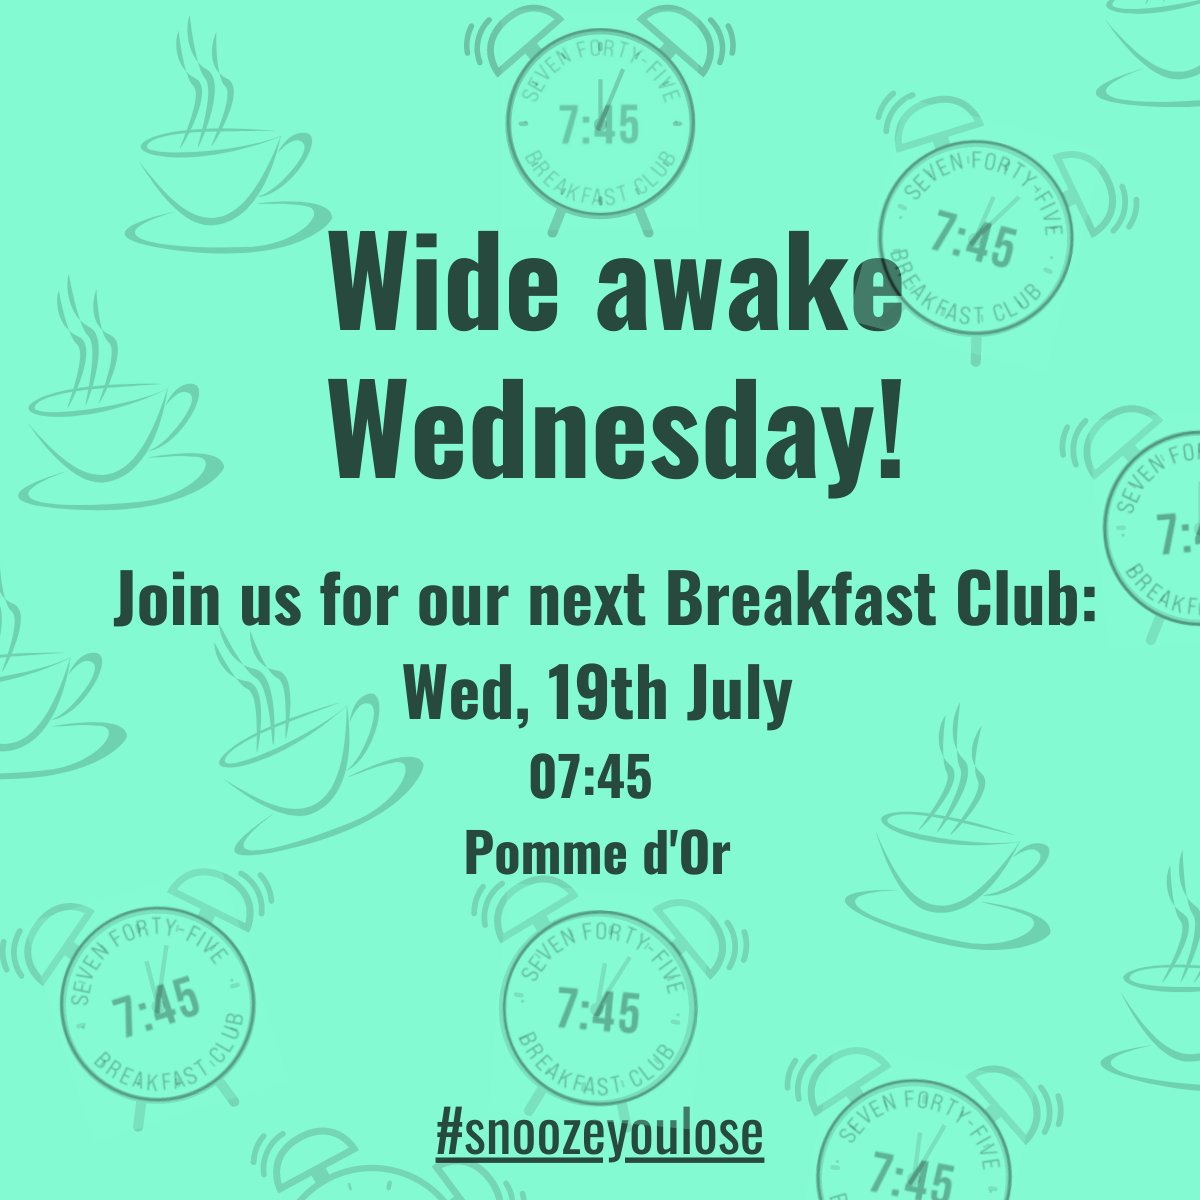 Set your alarm for Brekkie Club time!
See you bright and breezy in the morning for the last meeting till September.
#snoozeyoulose
@PommedOrHotel